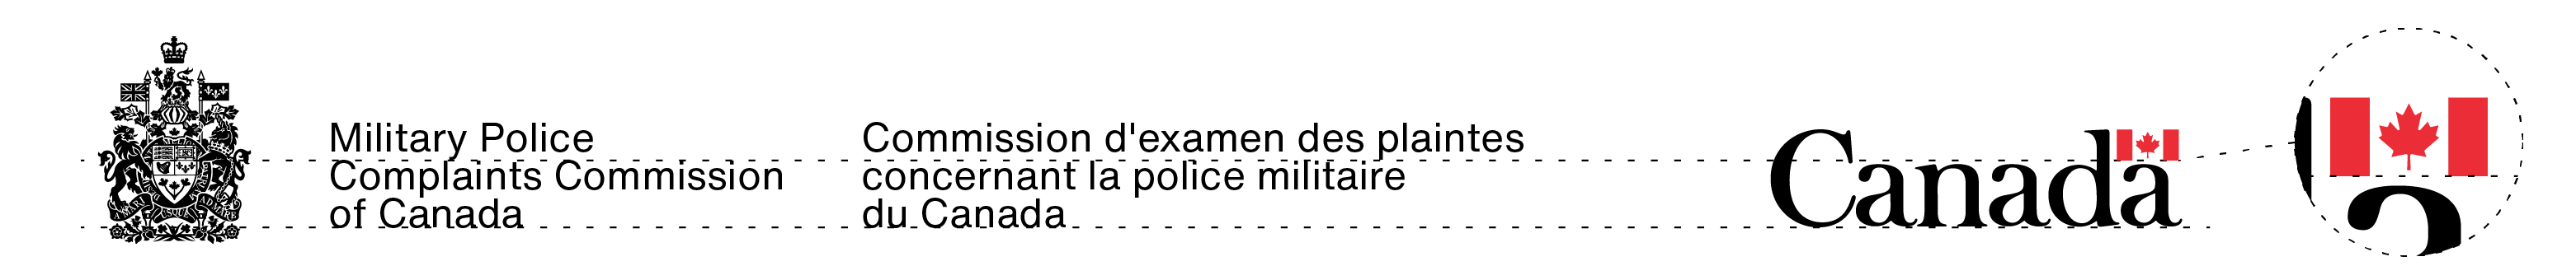 The arms signature for the Military Police Complaints Commission of Canada and the Canada wordmark in their standard colours. The size relationship is explained in text above.